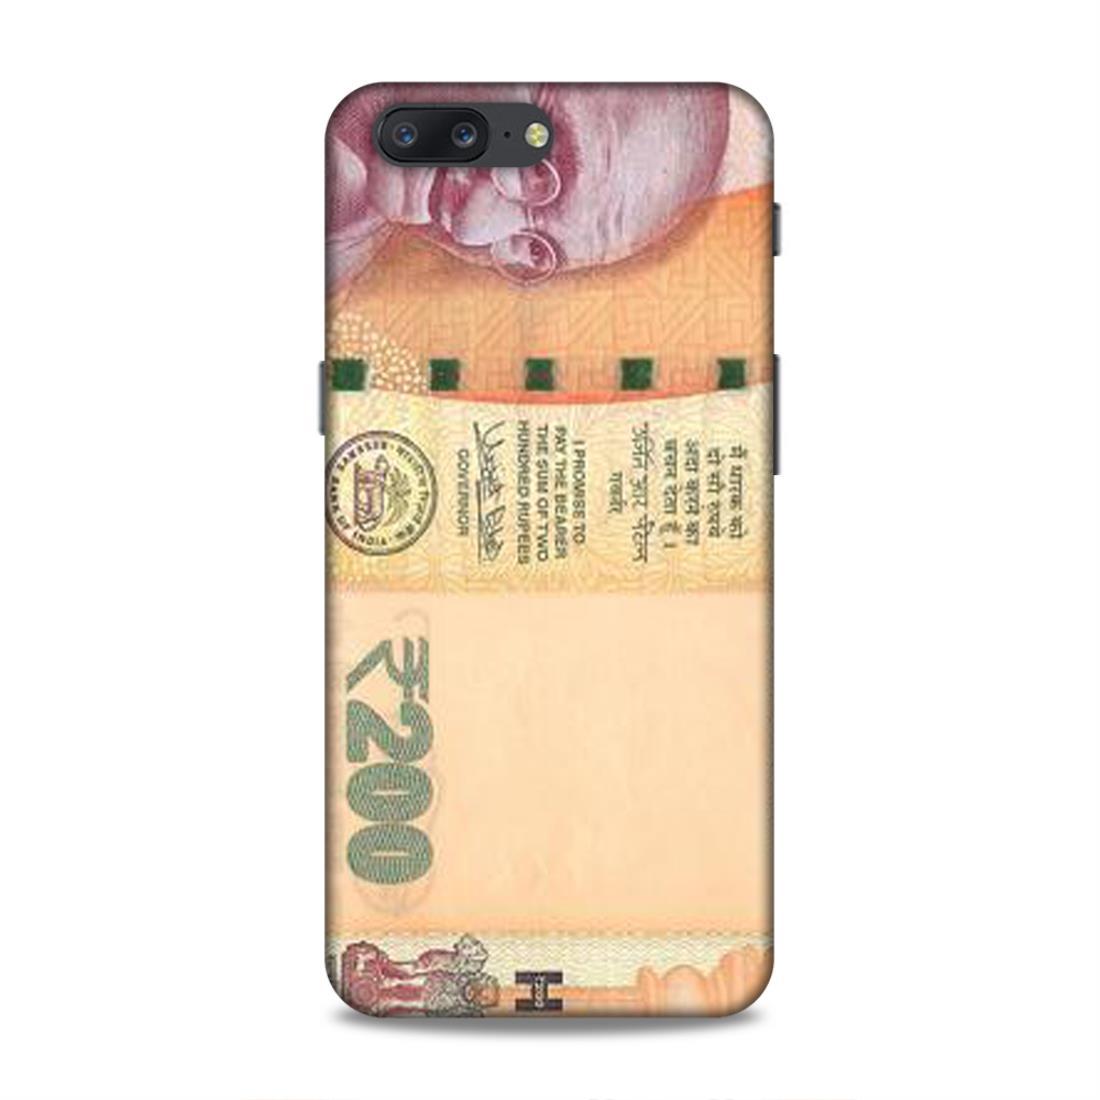 Rs 200 Currency Note OnePlus 5 Phone Case Cover